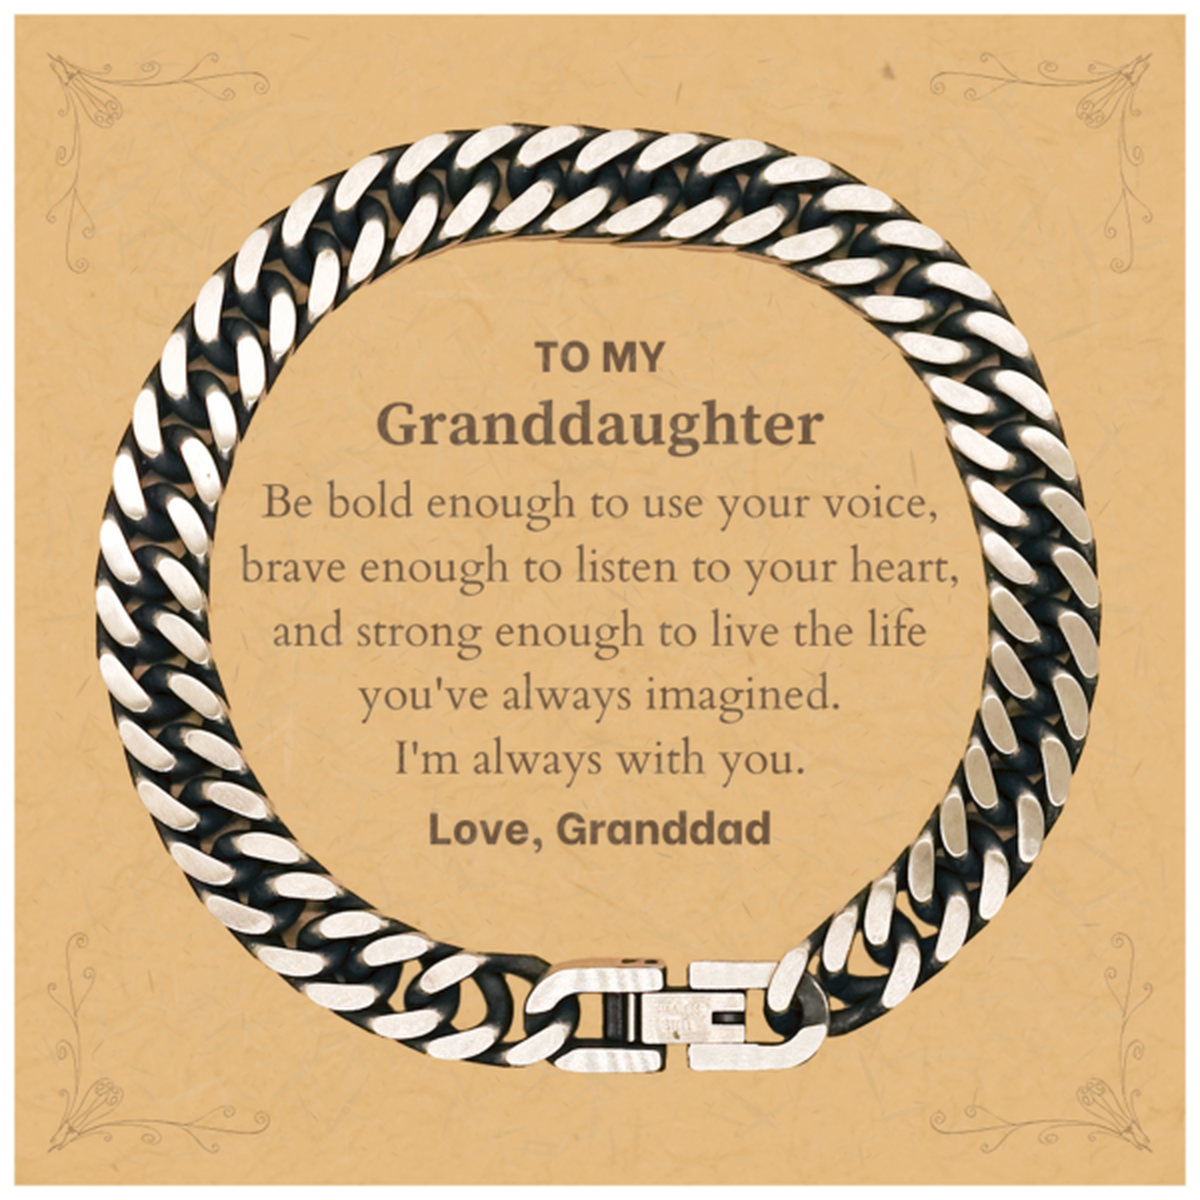 Keepsake Granddaughter Cuban Link Chain Bracelet Gift Idea Graduation Christmas Birthday Granddaughter from Granddad, Granddaughter Be bold enough to use your voice, brave enough to listen to your heart. Love, Granddad